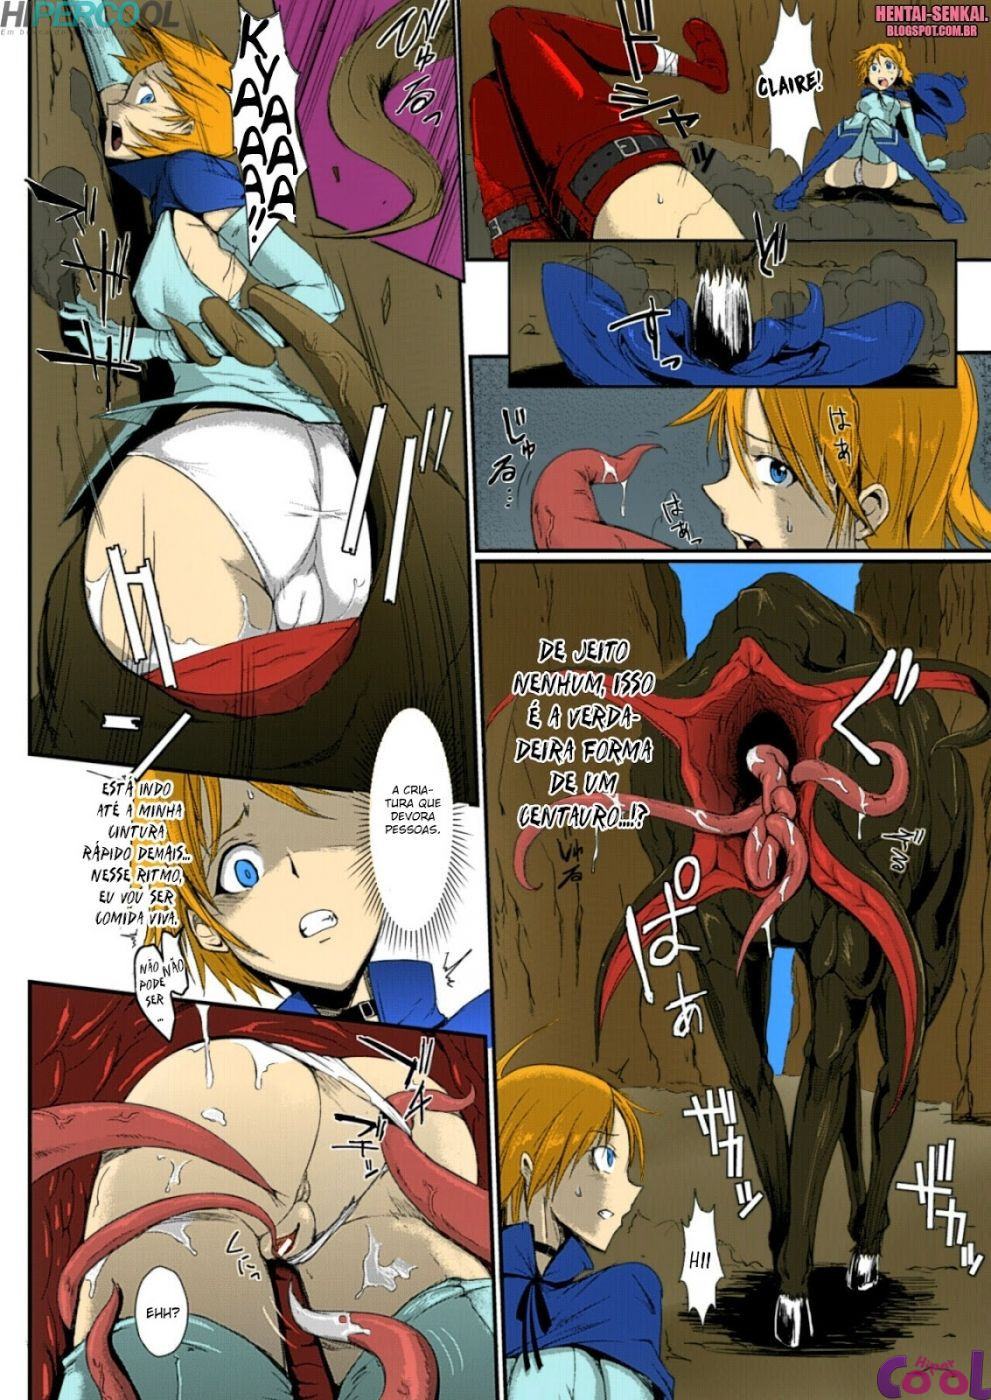 man-eater-colorido-chapter-01-page-04.jpg